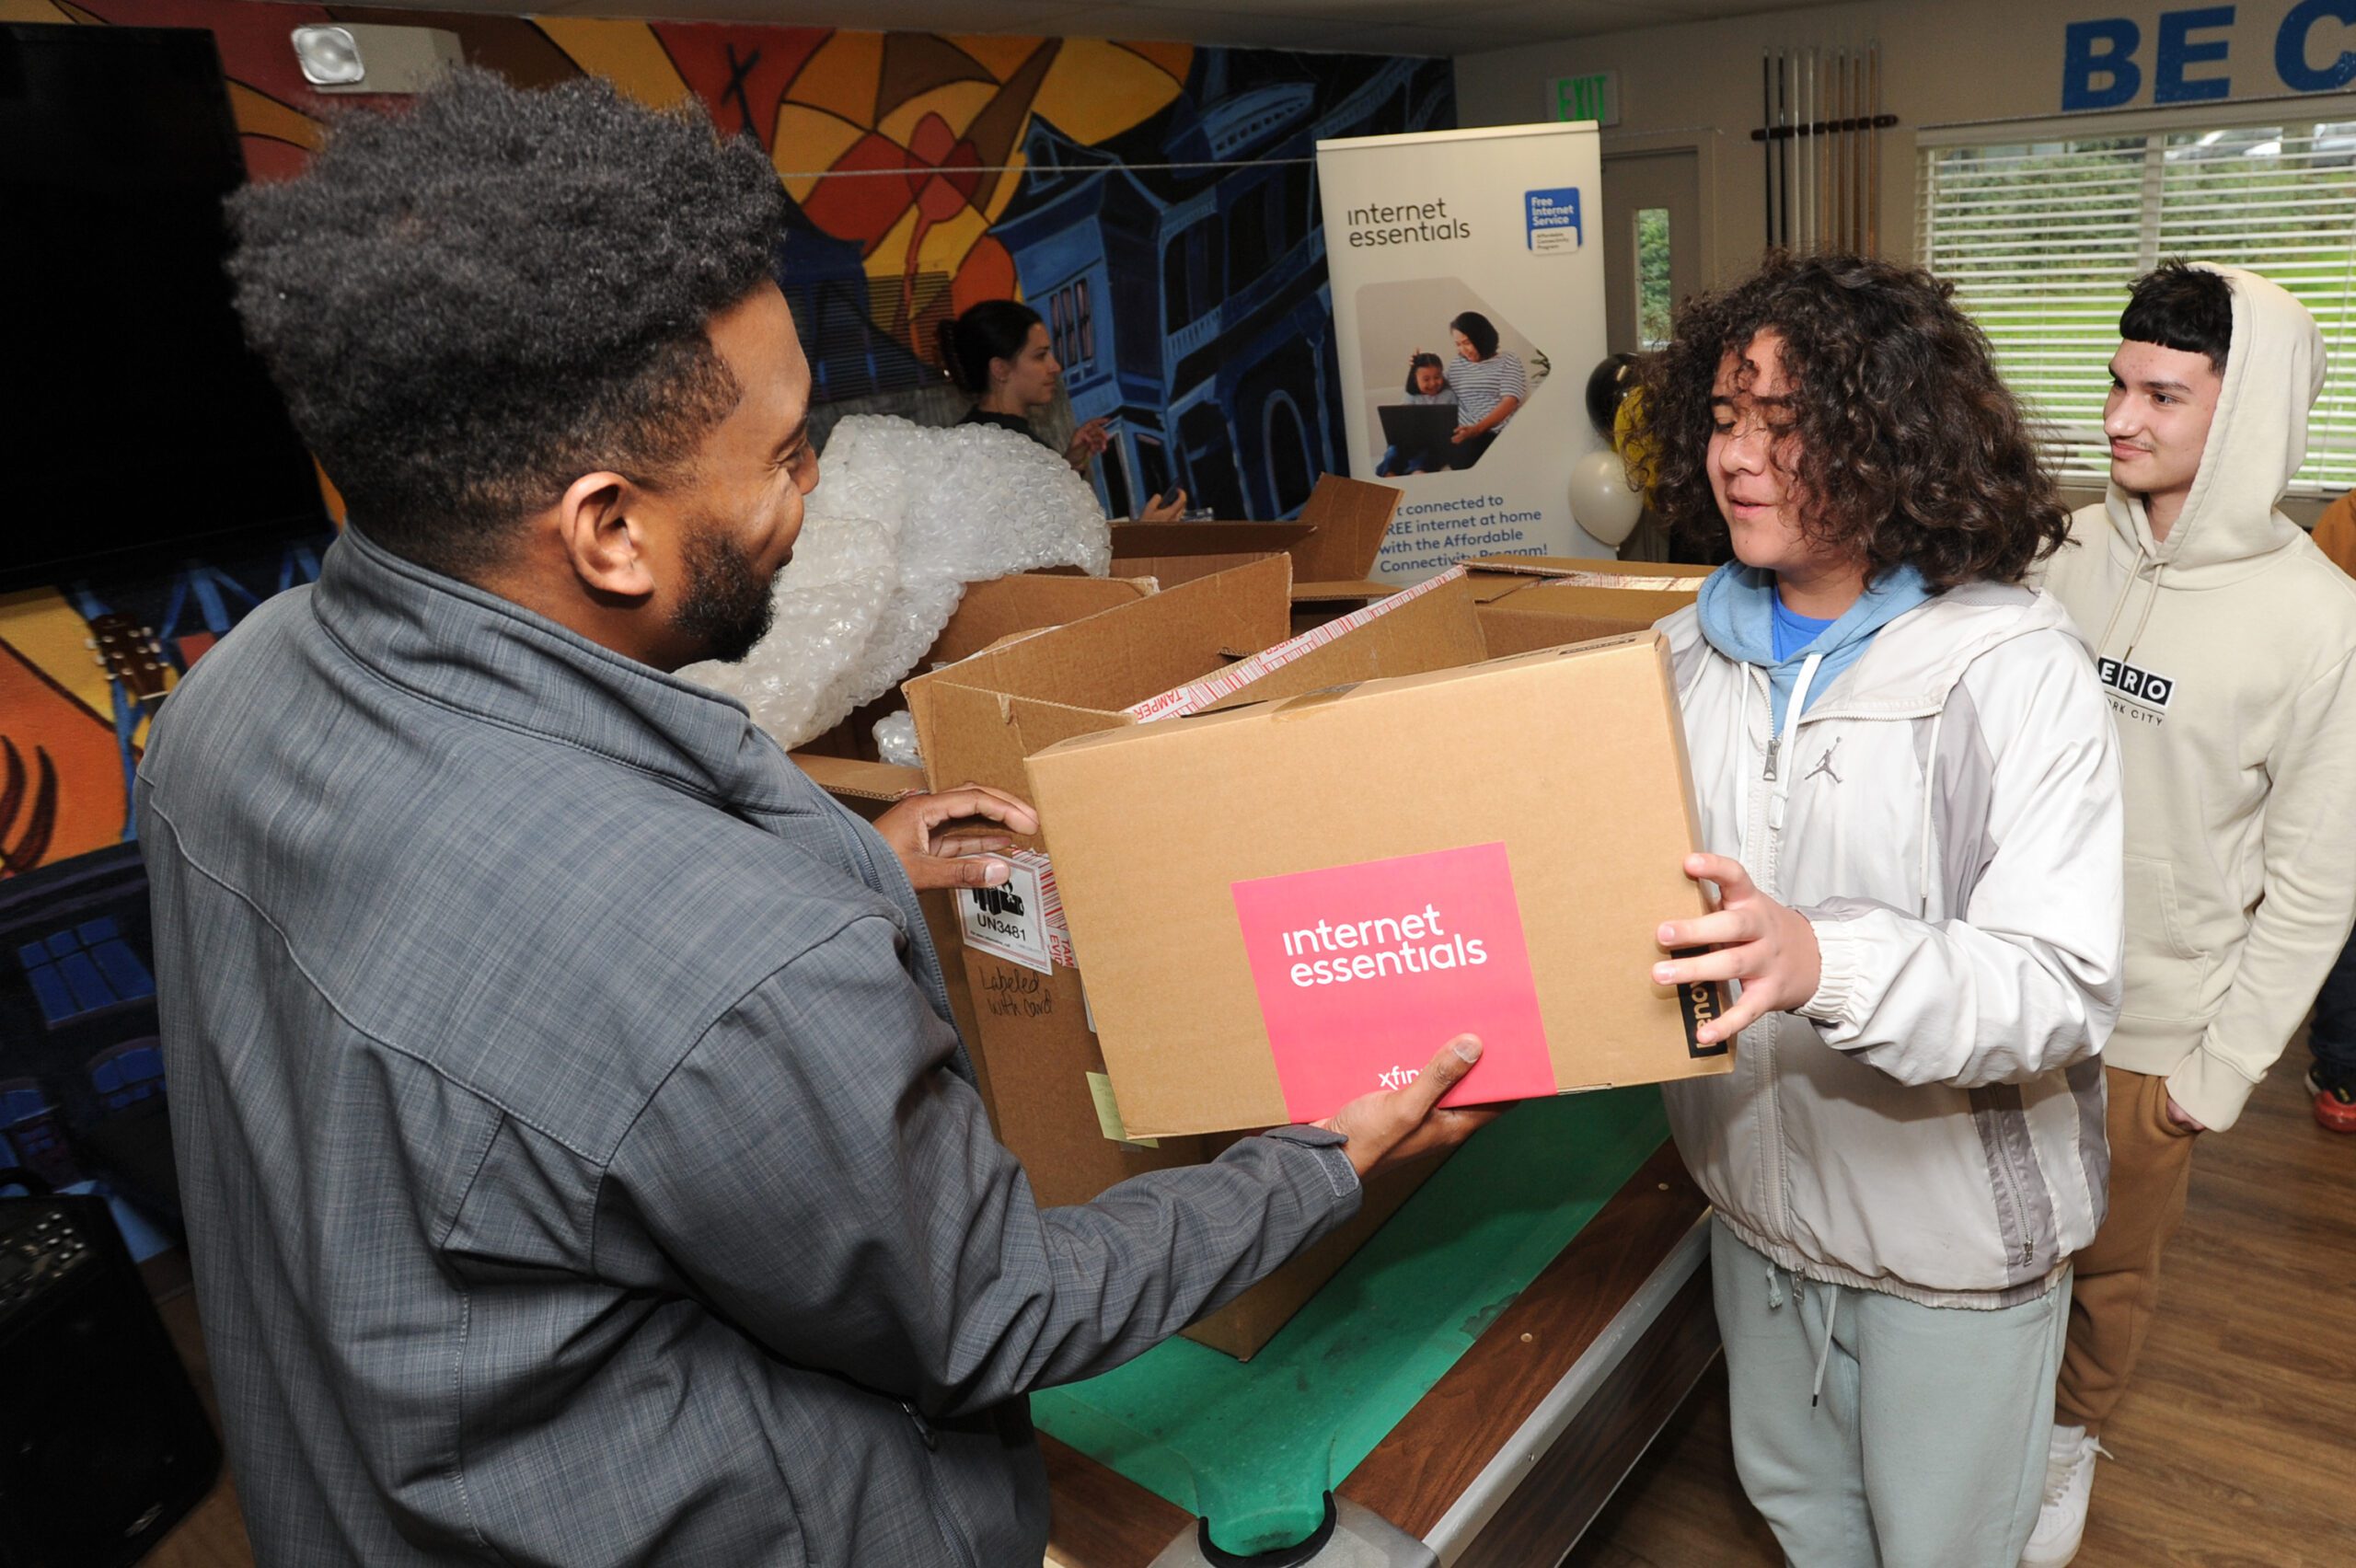 A youth receives a laptop from a Comcast employee.